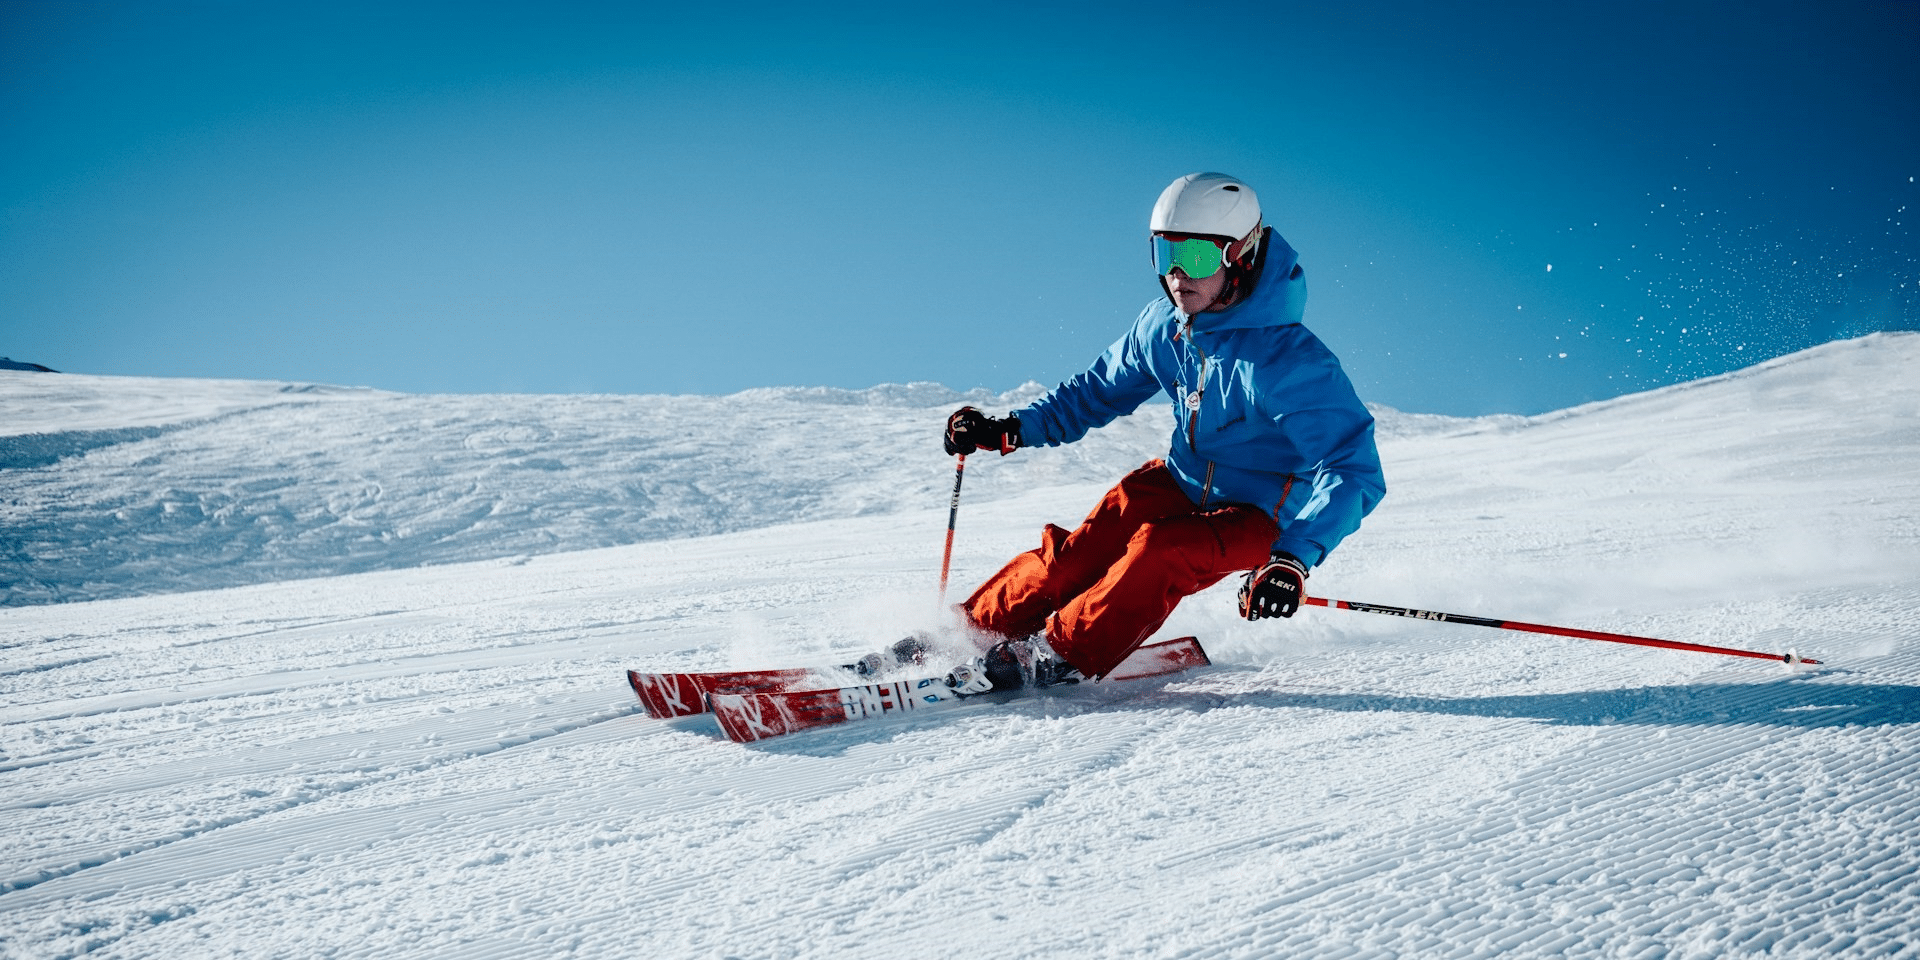 Carving the Slopes: The Artistry of Skiing